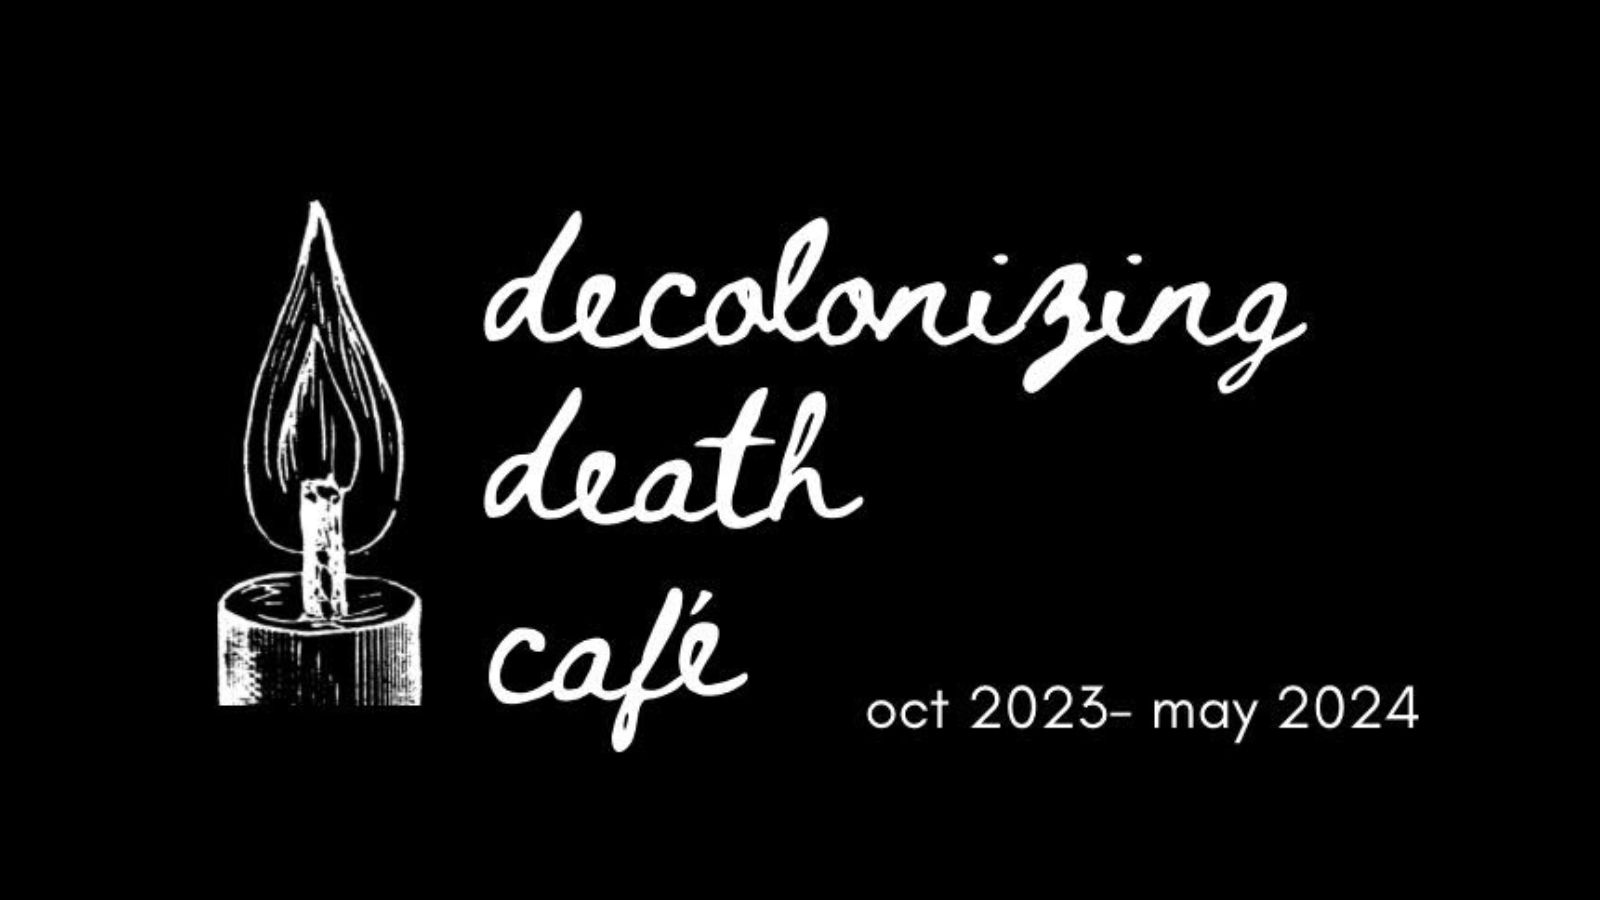 Candle and Decolonizing Death Cafe